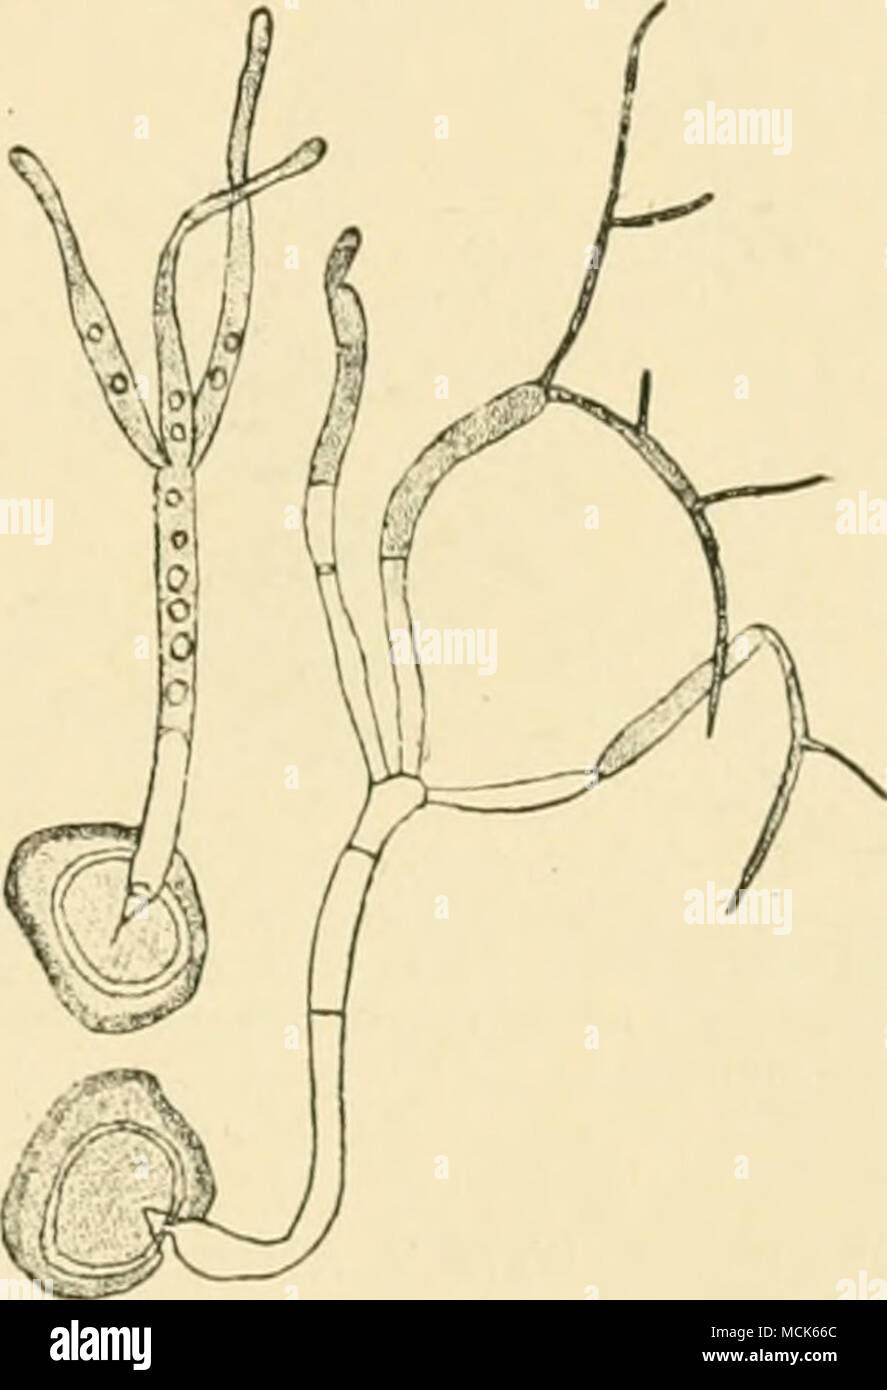 . Fio. lQ.âEntyloma Magnusii. Germin- ated spores; the promycelium of one shows a whorl of three branches with apices elongating to form germ-tubes; the other shows two, out of three, germ-tubes giving off branched sporidia (conidia). (After Woronin.) E. leproidum Trab.- Oedomyces leproides (Sacc.)]. Diseased beet-root exhibits irregular outgrowths, which enclose spaces filled with the brown spore-powder of this fungus. E. nympheae (Cunningham) Setch.-'' on various species of Nympliea in America, Africa, and Europe. Melanotaenium.^ spores unicellular in patches on an intercellular mycelium l Stock Photo